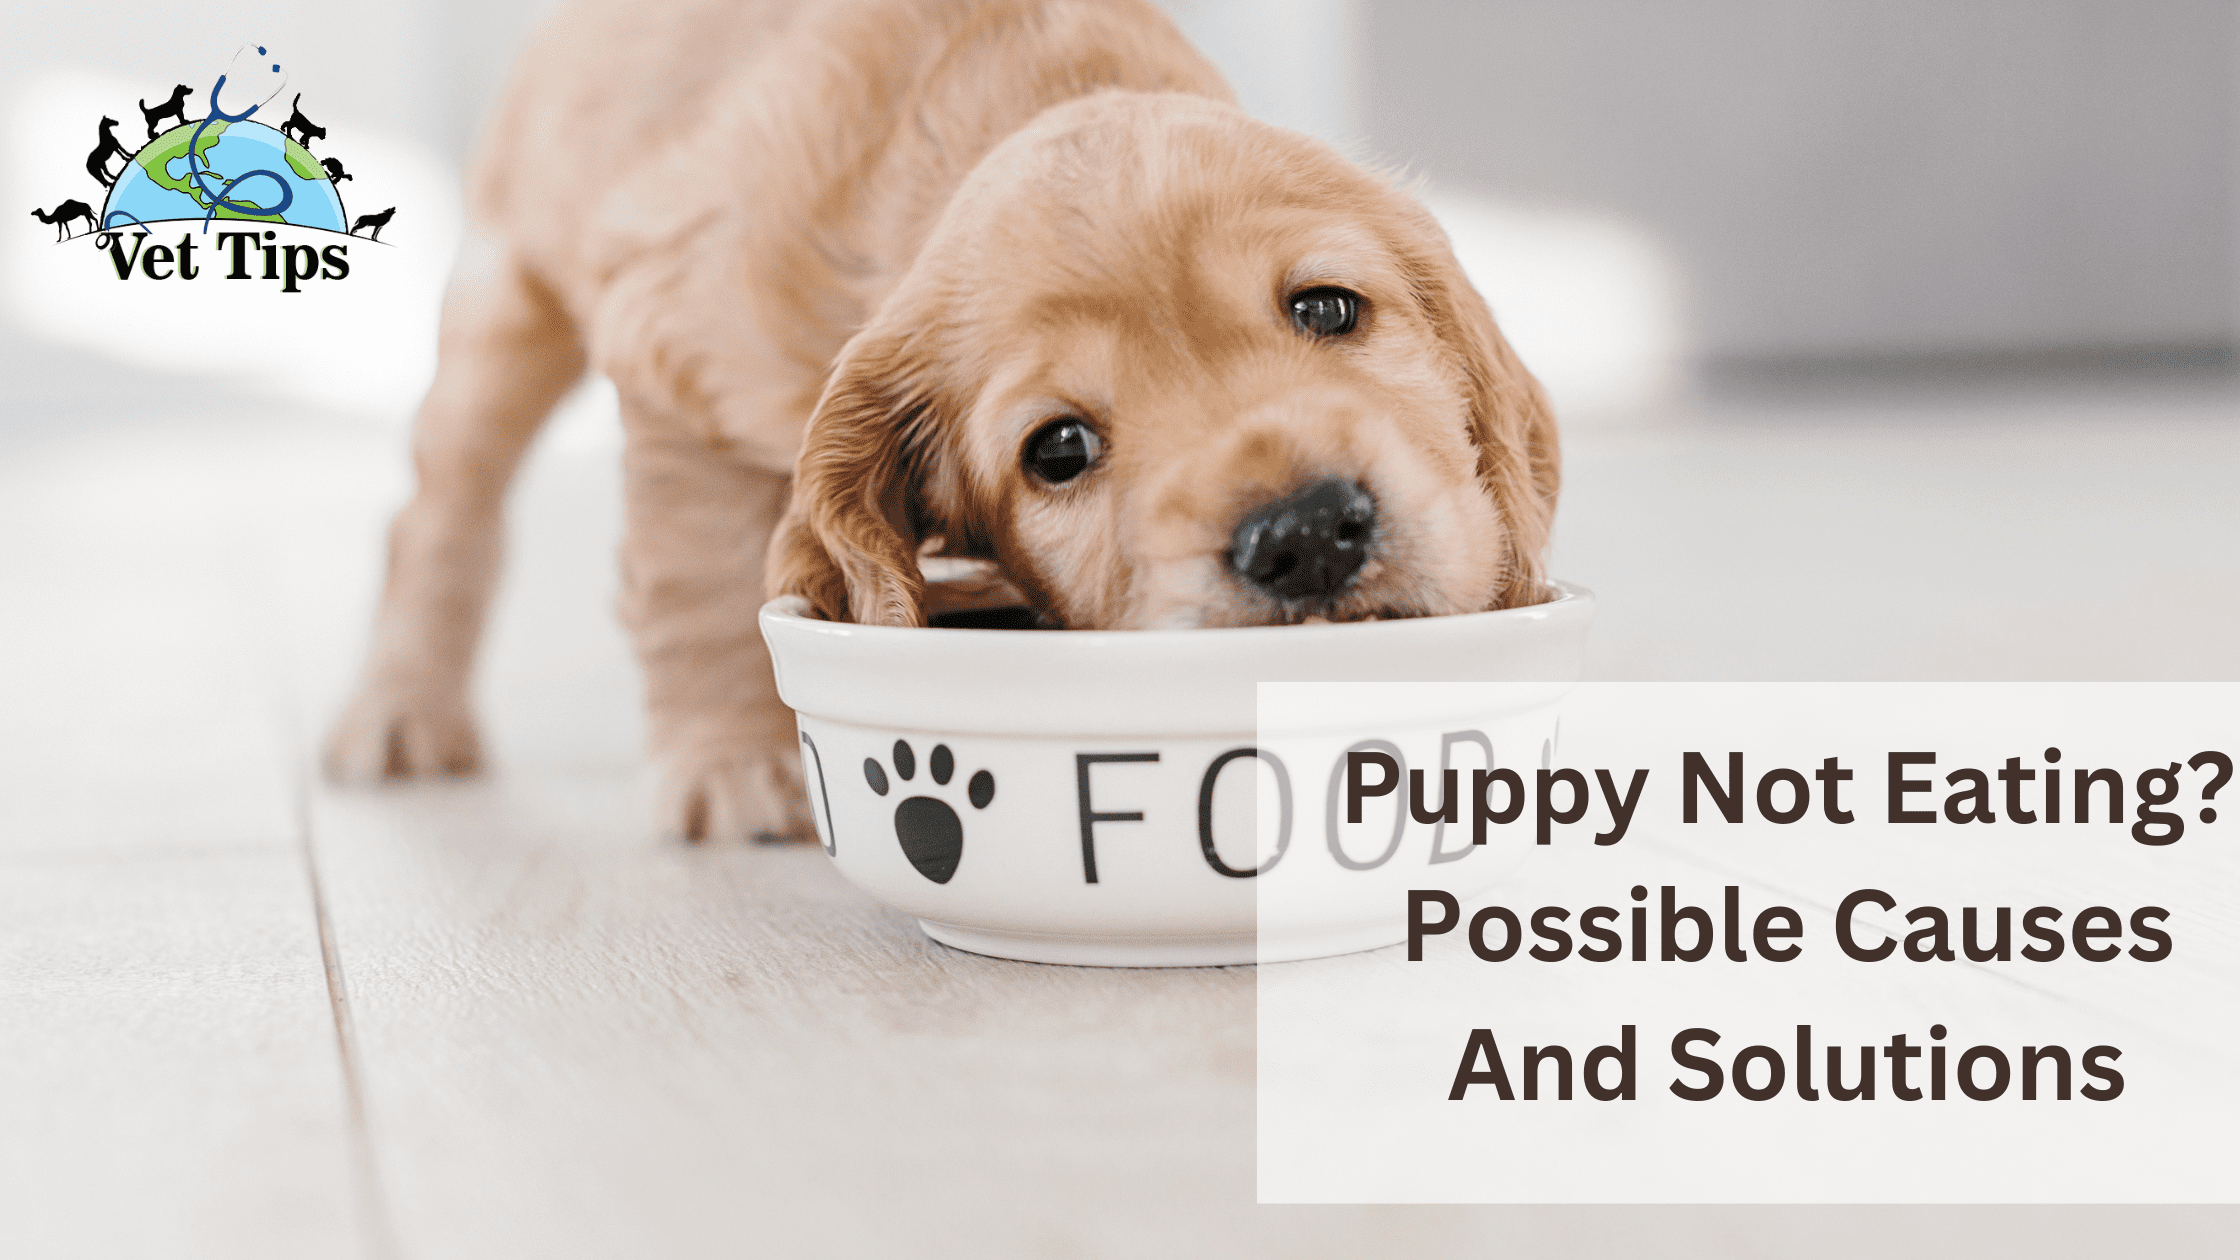 Puppy Not Eating? Possible Causes And Solutions